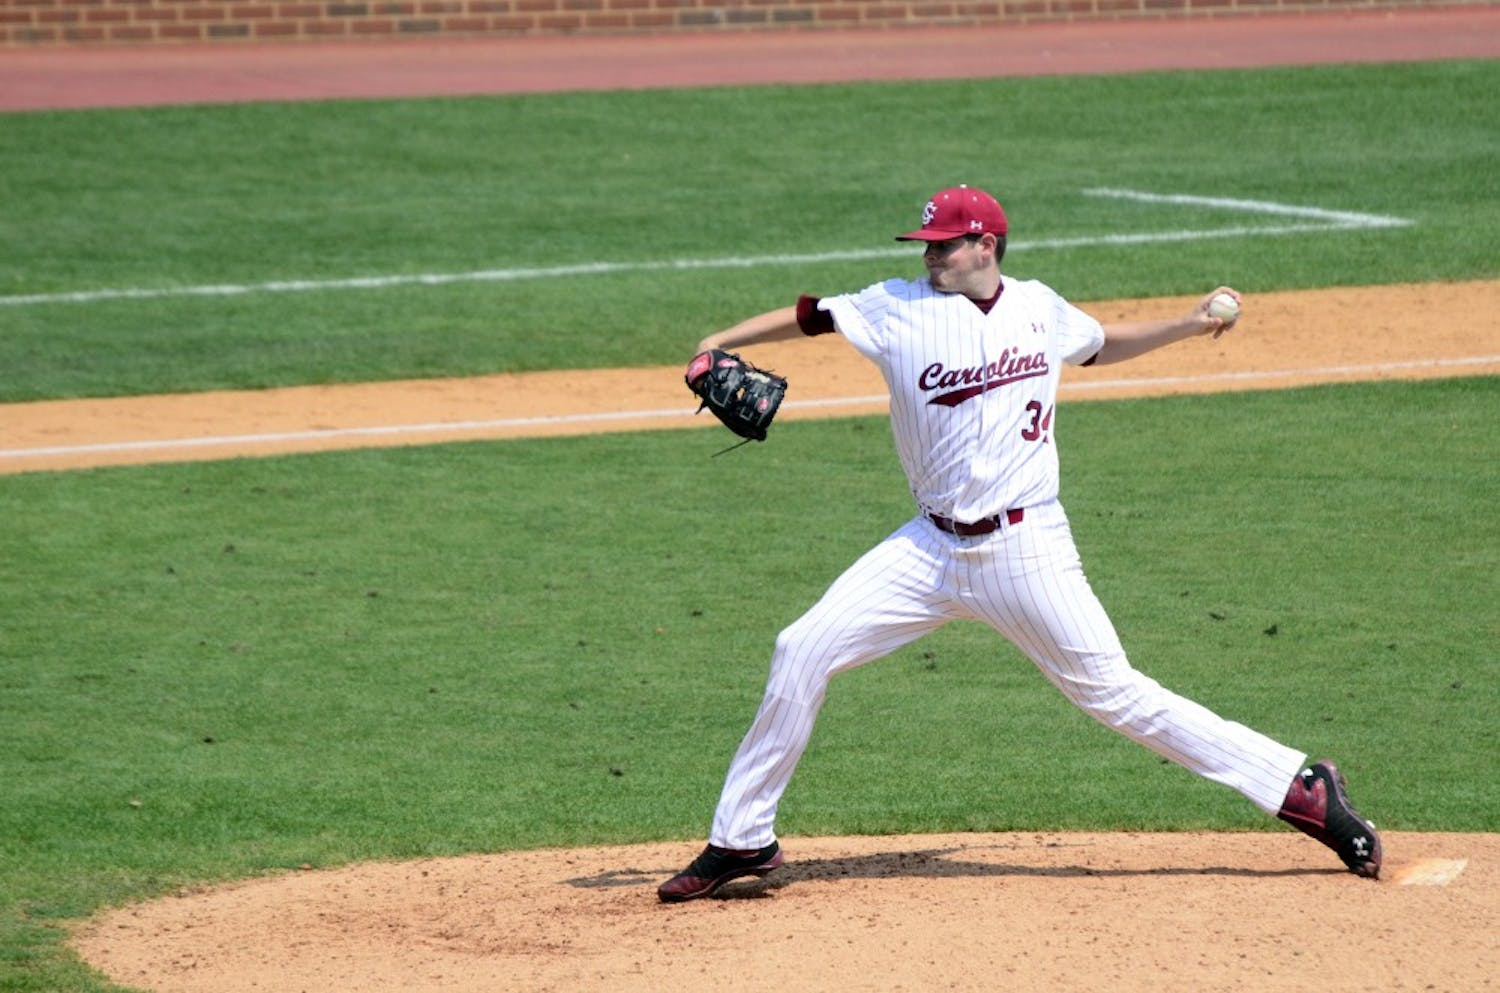 Pitcher Jason Montgomery led the Gamecocks to a victory in their second game against UNC.